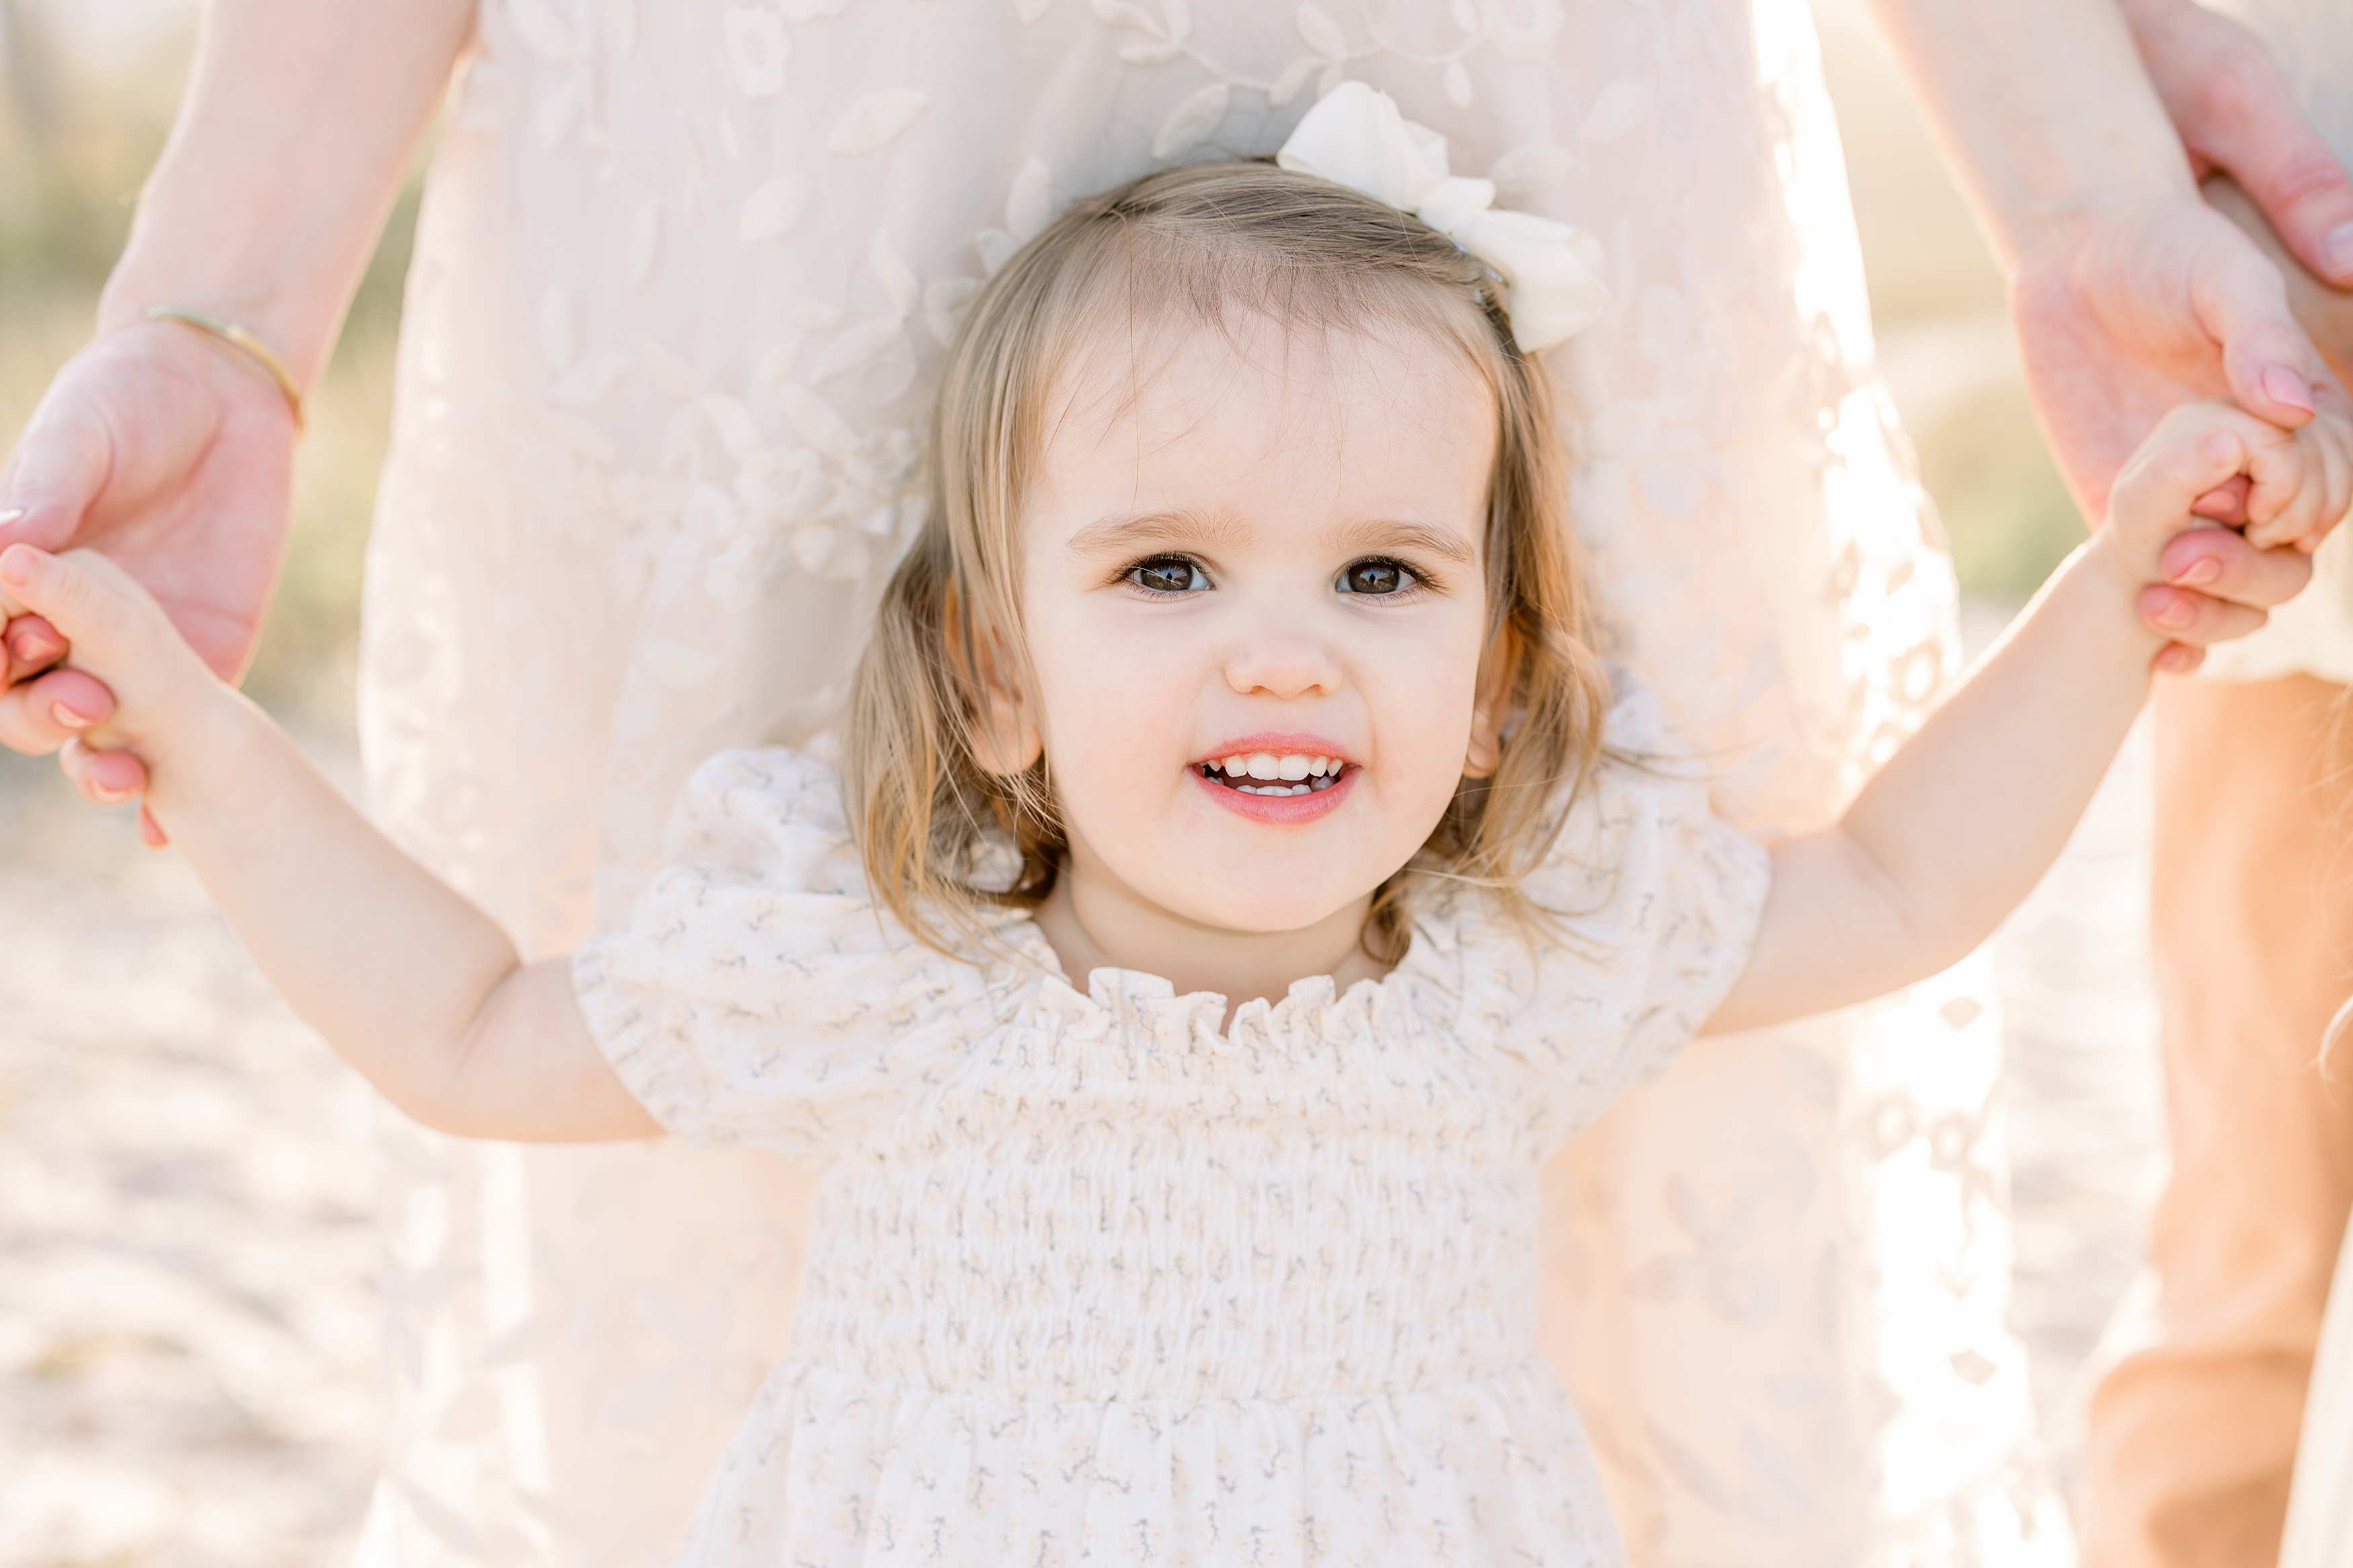 A light and airy beach portrait of a toddler girl wearing a cream dress.